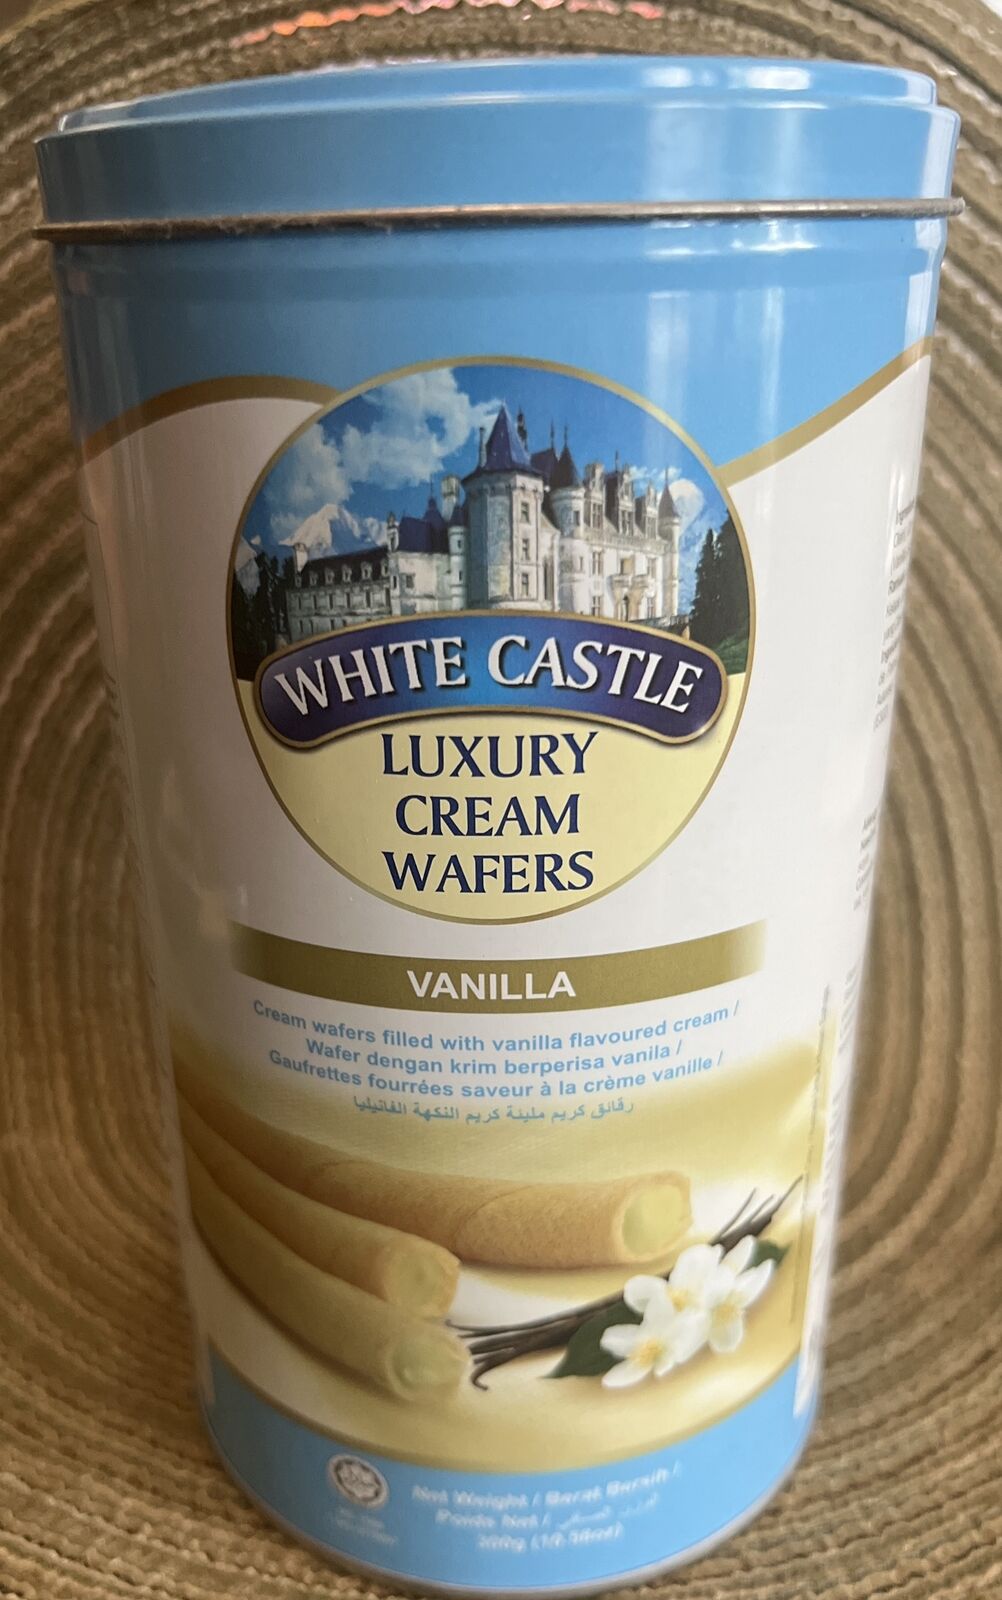 WHITE CASTLE Luxury Cream Wafers “Empty Tin”From Malaysia(Not Burger W. Castle)